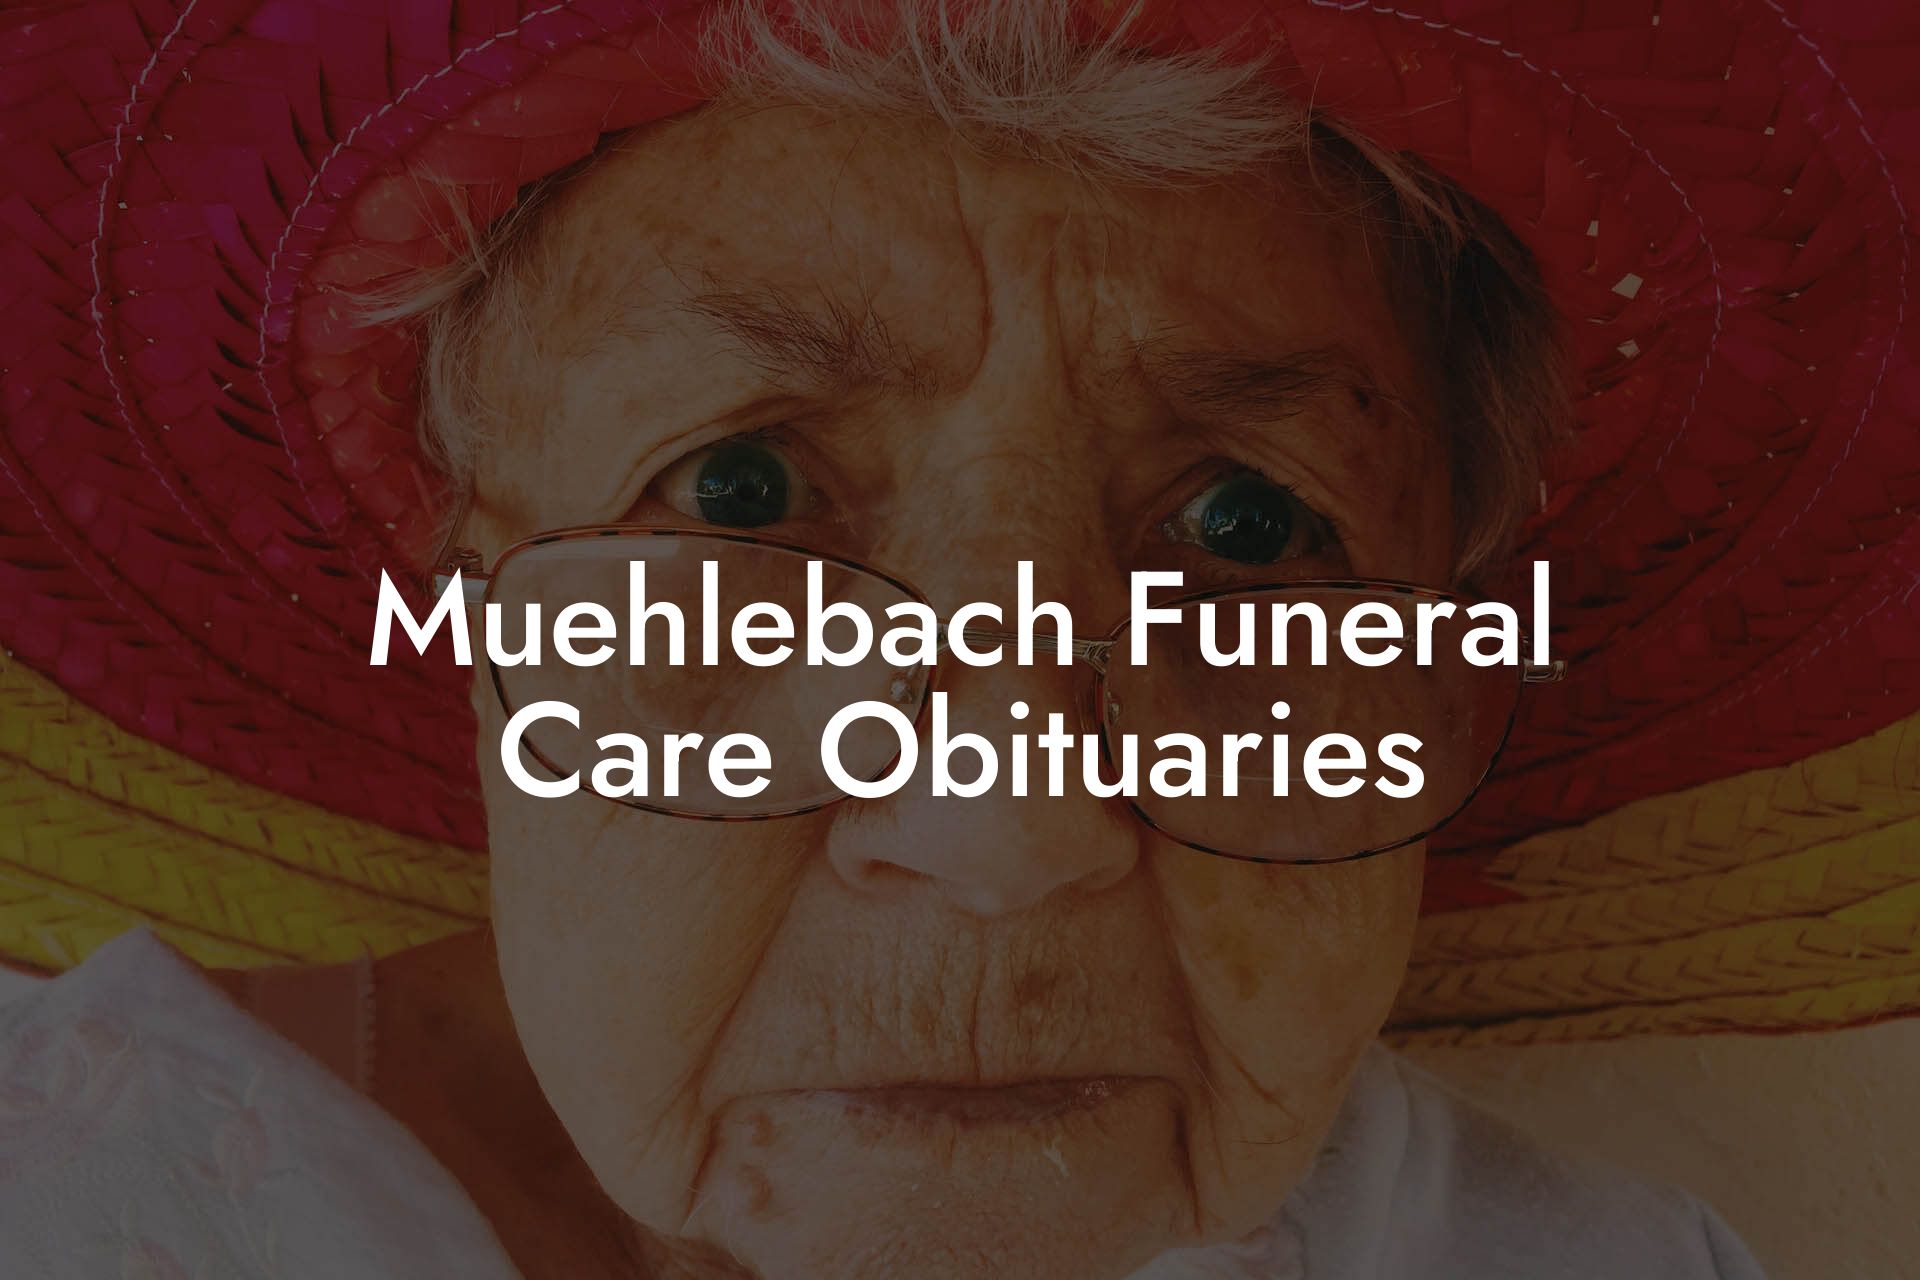 Muehlebach Funeral Care Obituaries